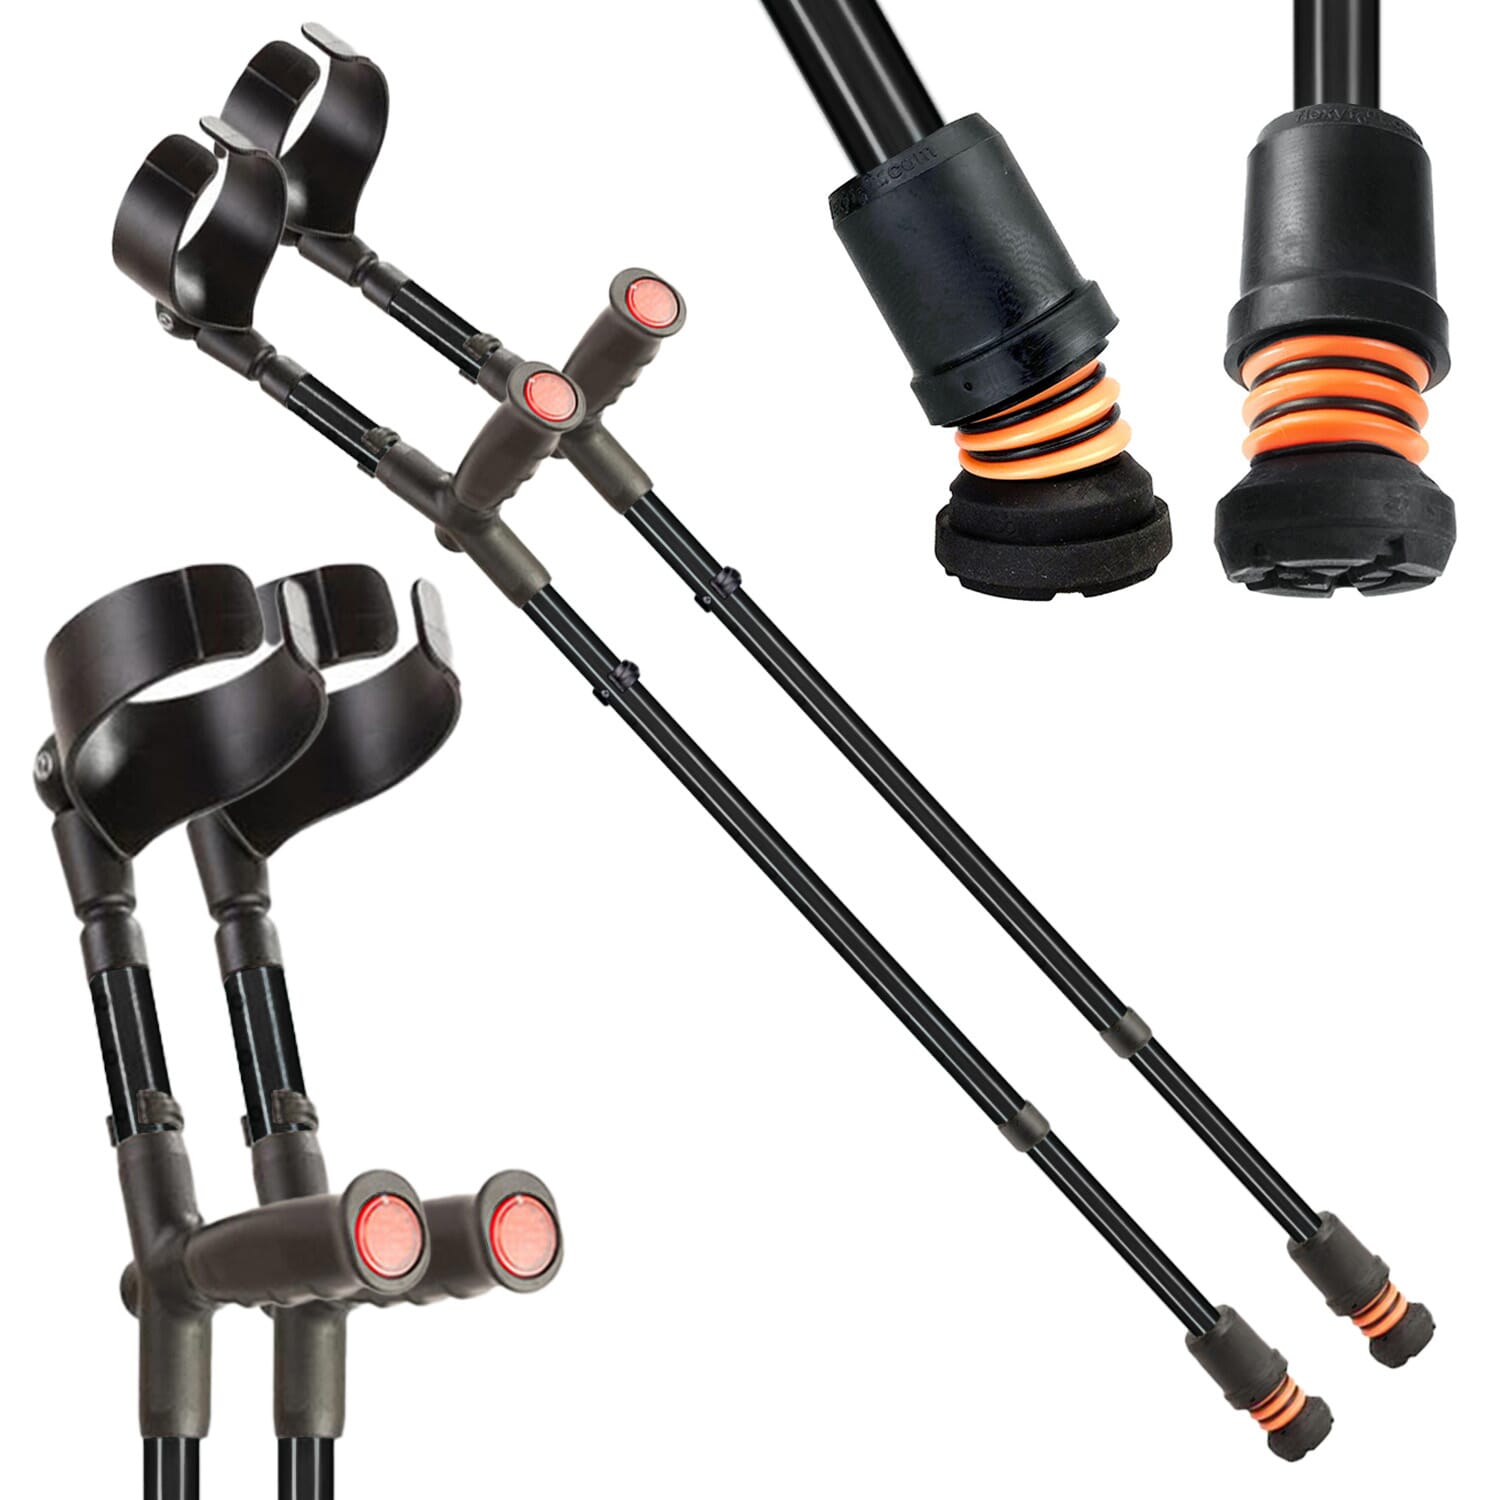 View Flexyfoot Soft Grip Double Adjustable Crutches Black Pair information